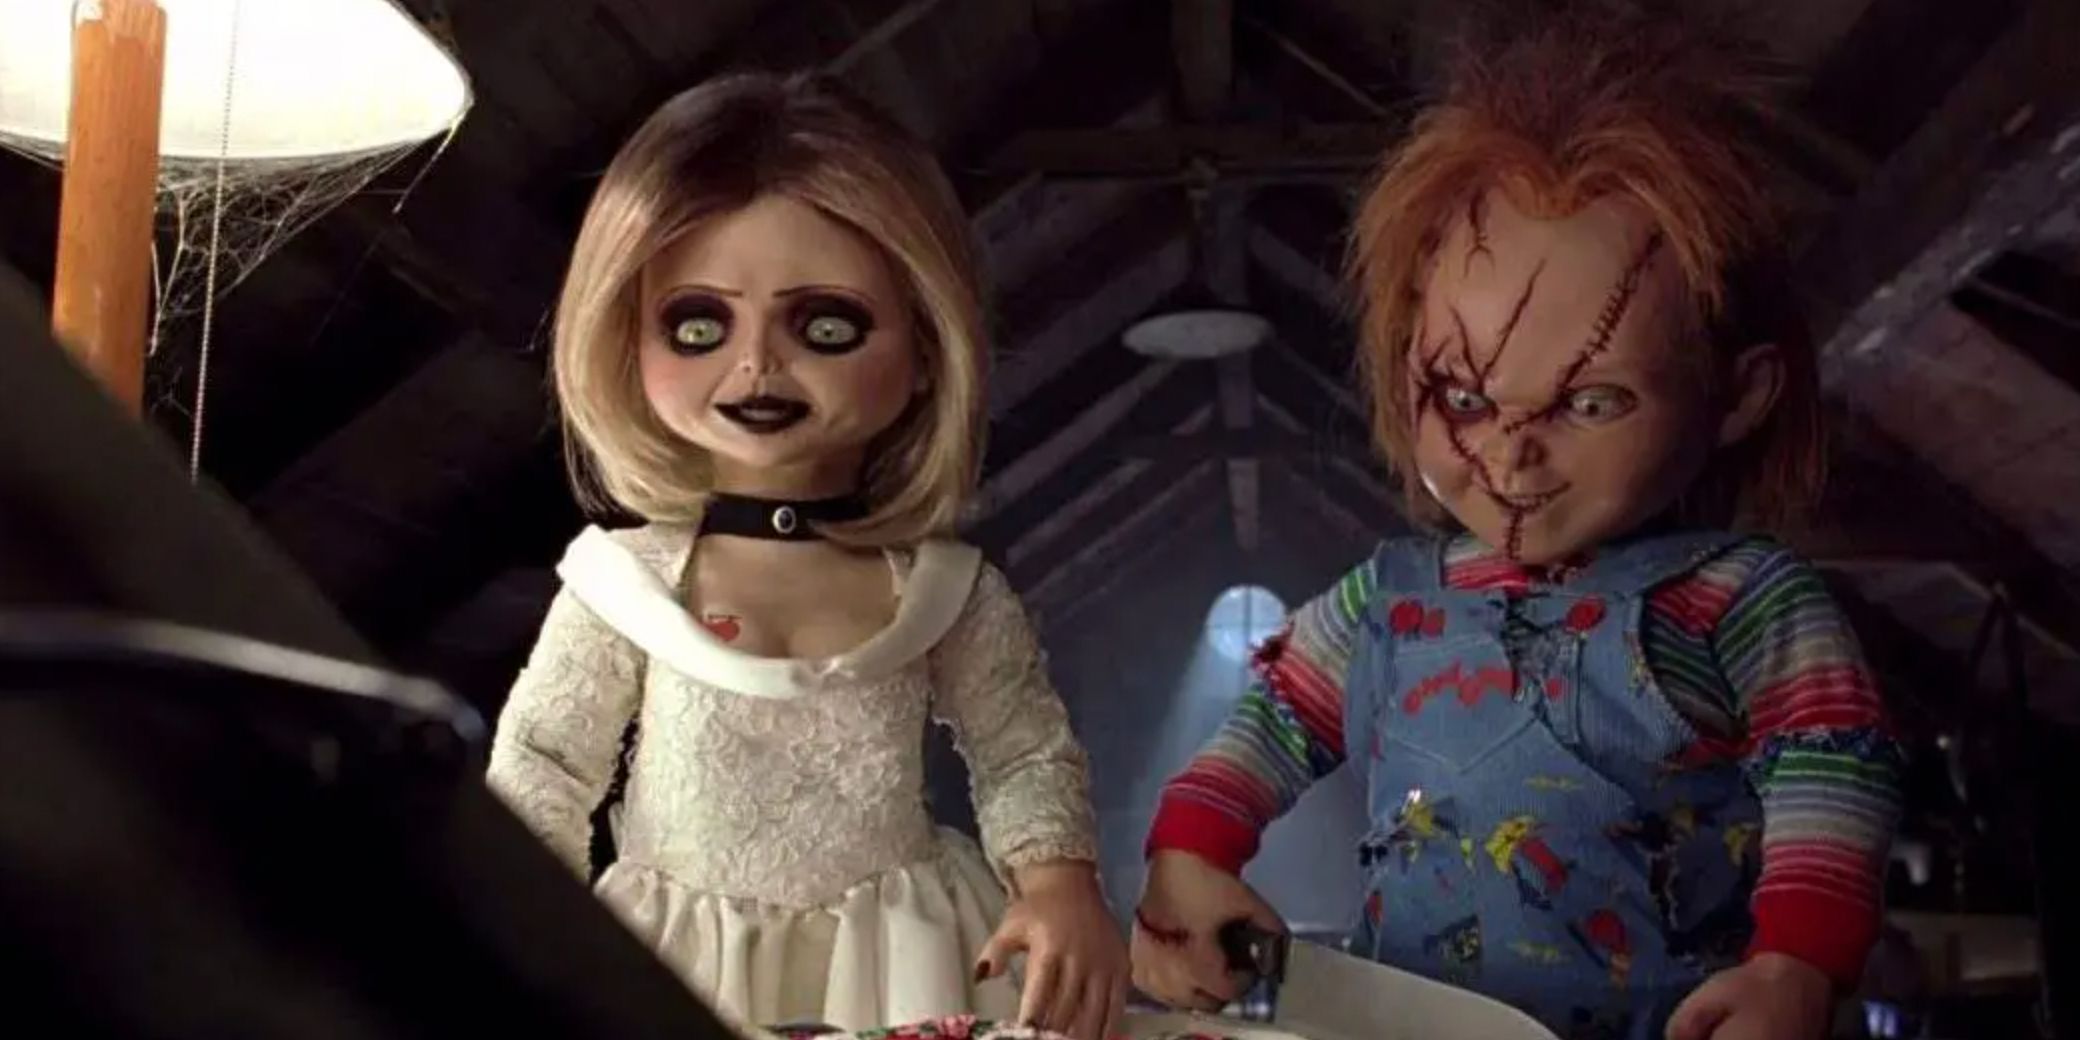 Tiffany and Chucky dolls talking to an unseen Glen doll in Seed of Chucky